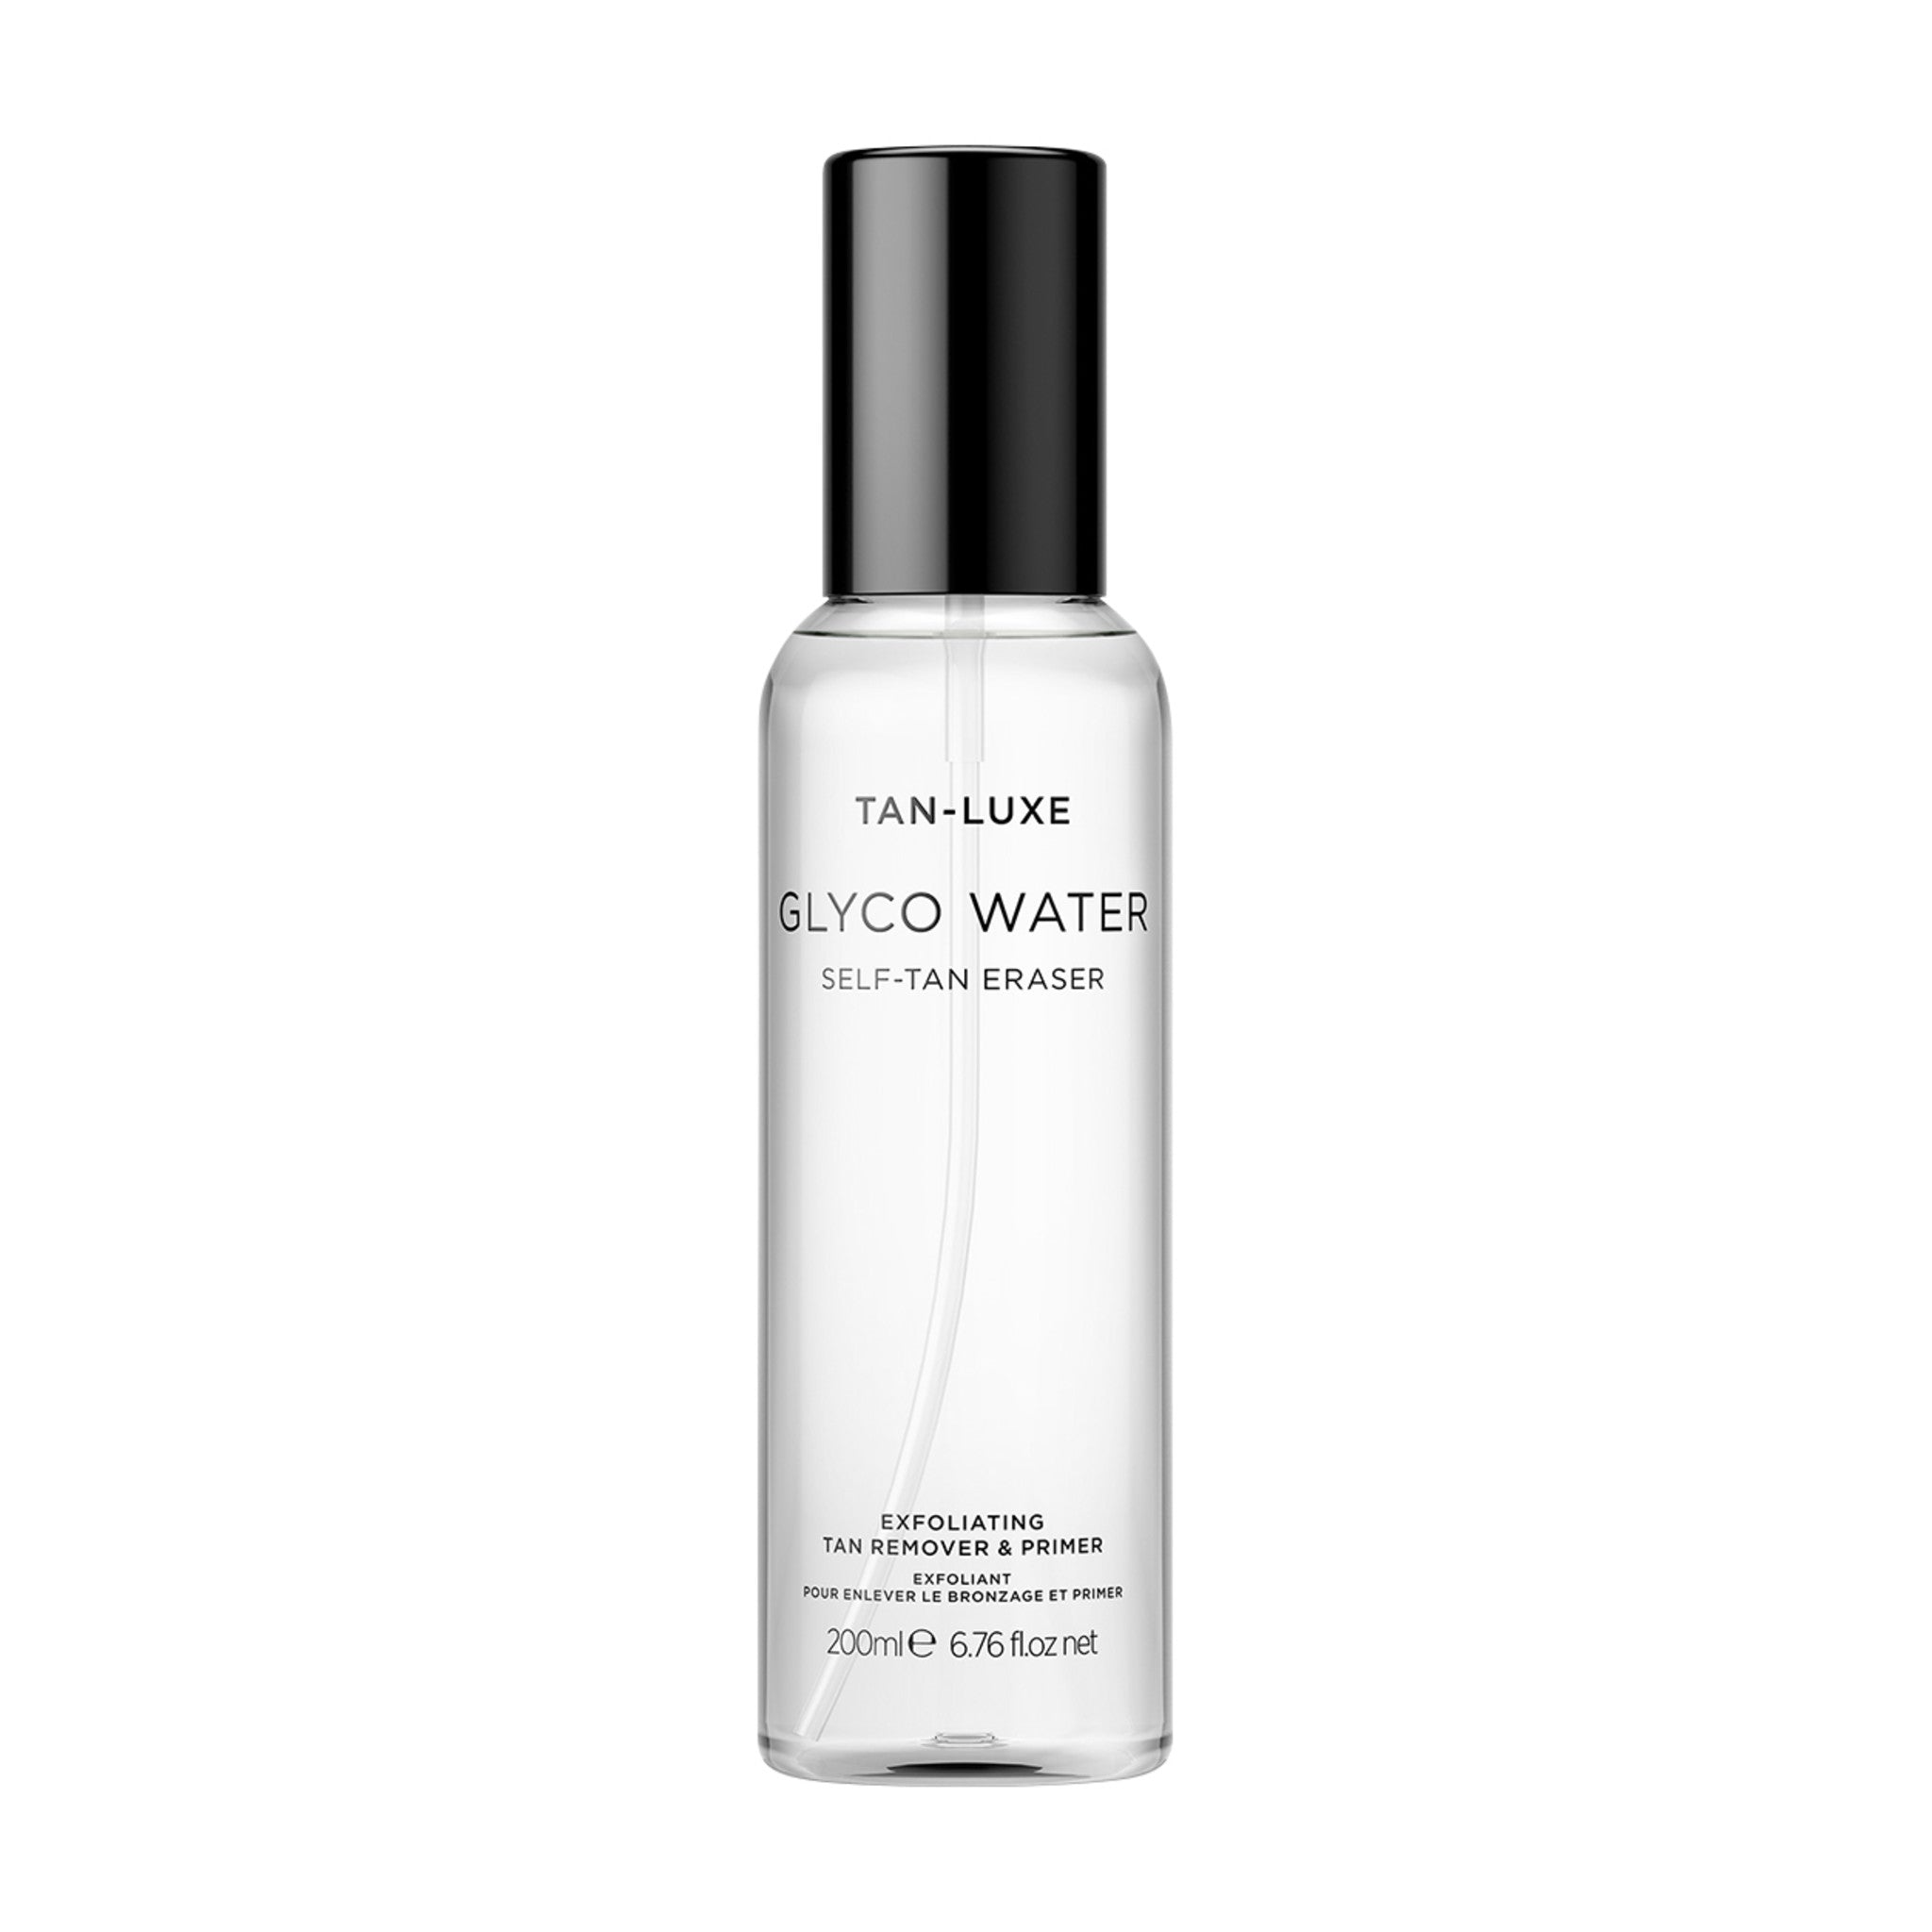 Tan-Luxe Glyco Water Tan Remover main image.